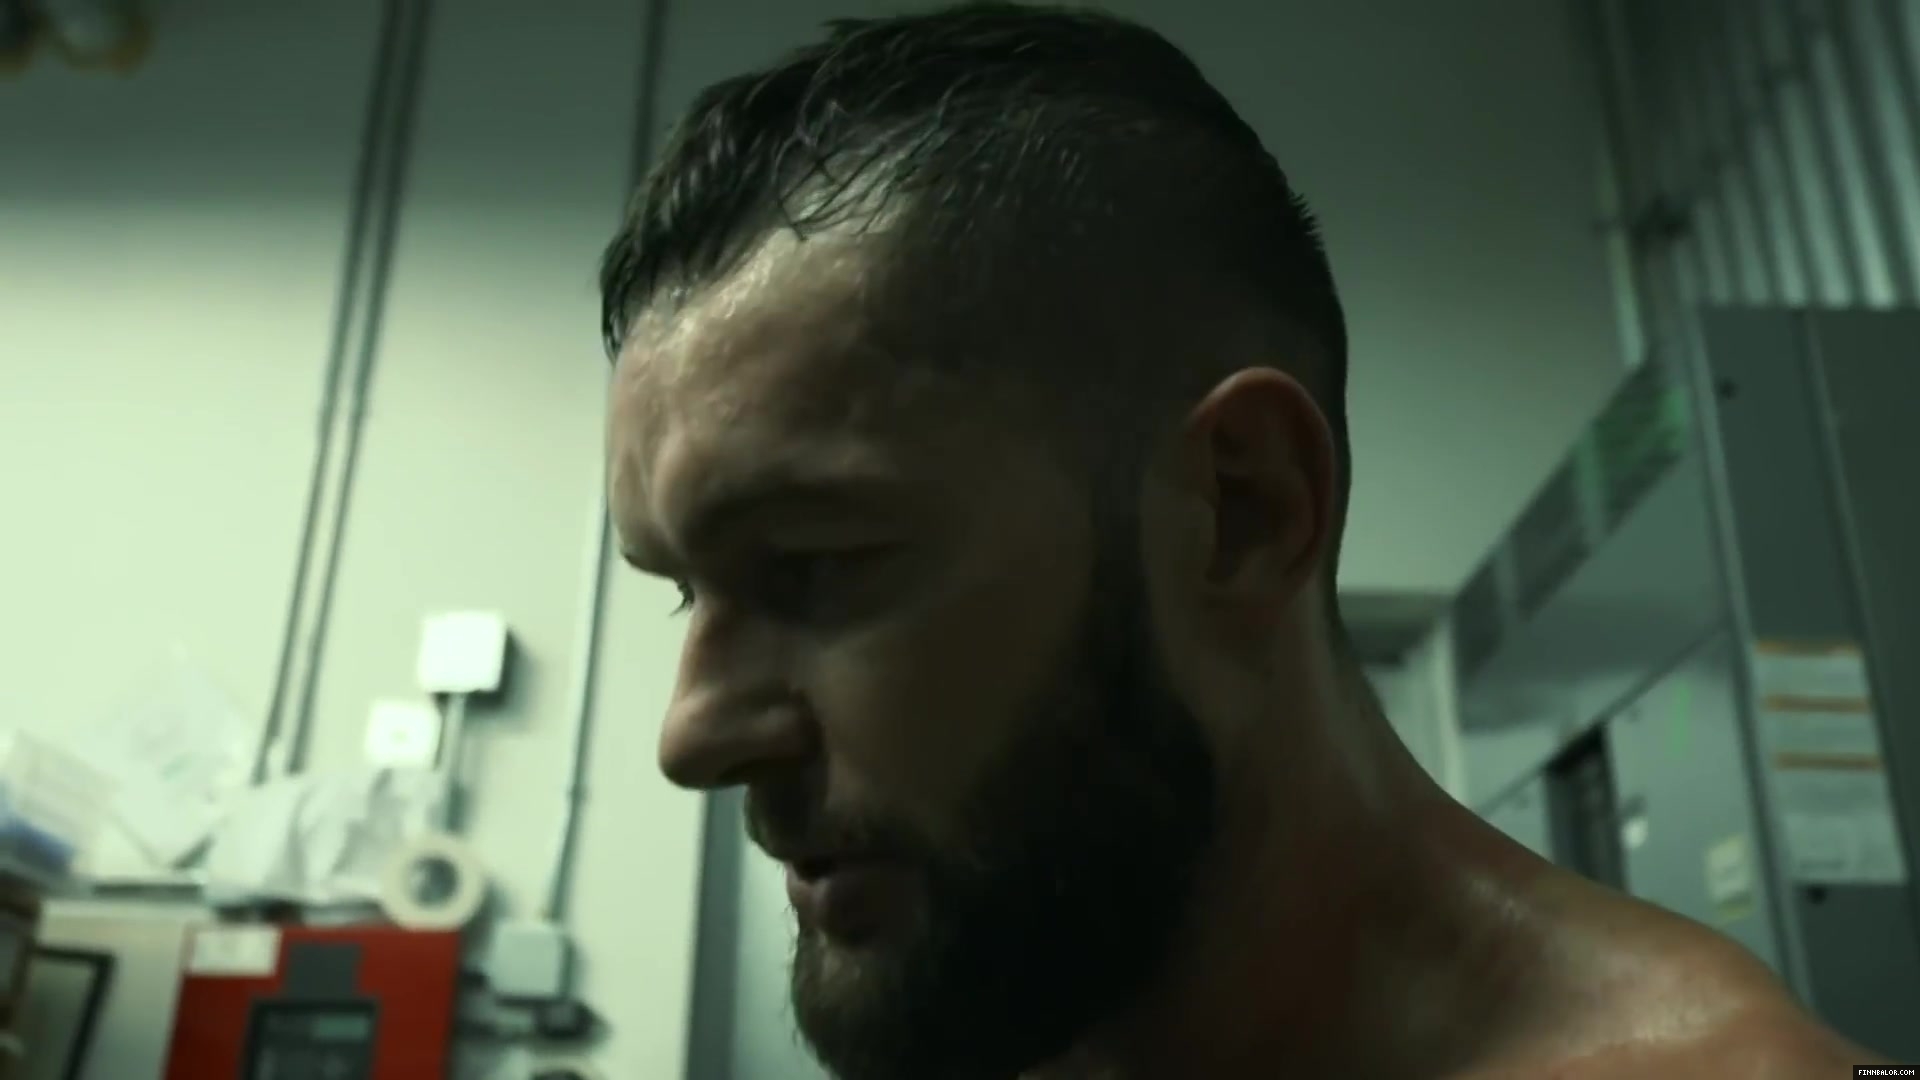 Finn_Balor___The_Rising_of_the_Prince_in_NXT_249.jpg